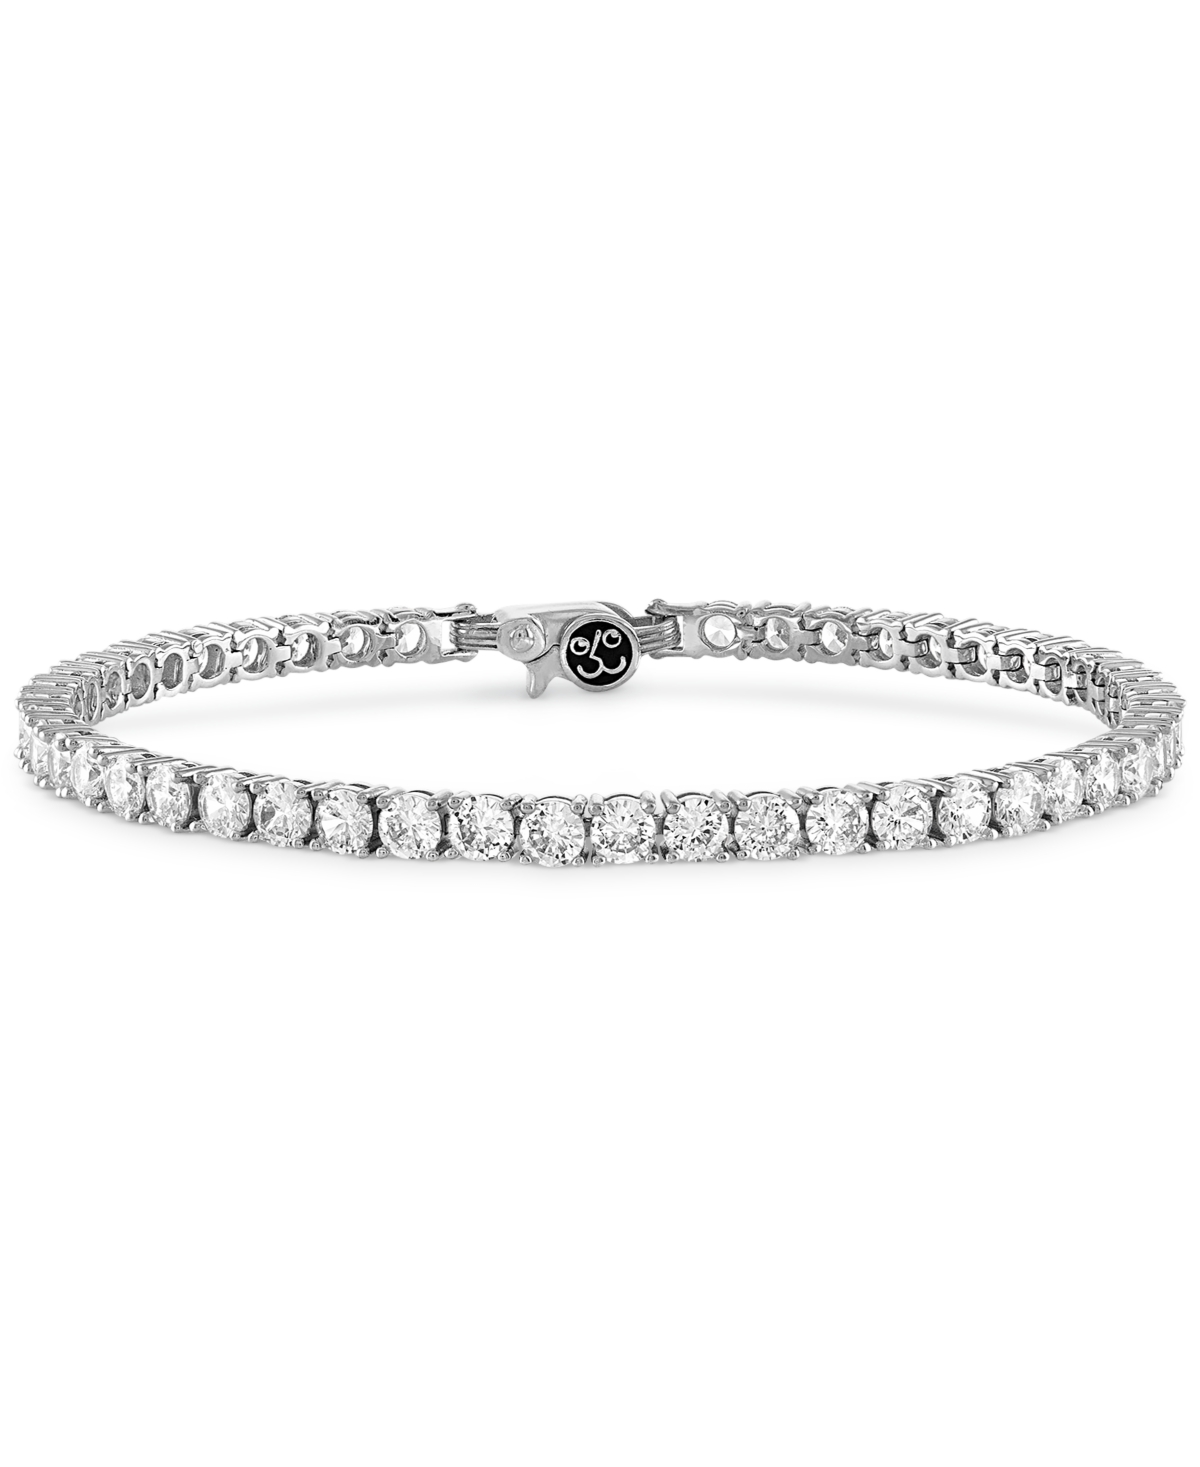 Esquire Men's Jewelry White Cubic Zirconia Tennis Bracelet in Sterling Silver (Also in Black Cubic Zirconia), Created for Macy's